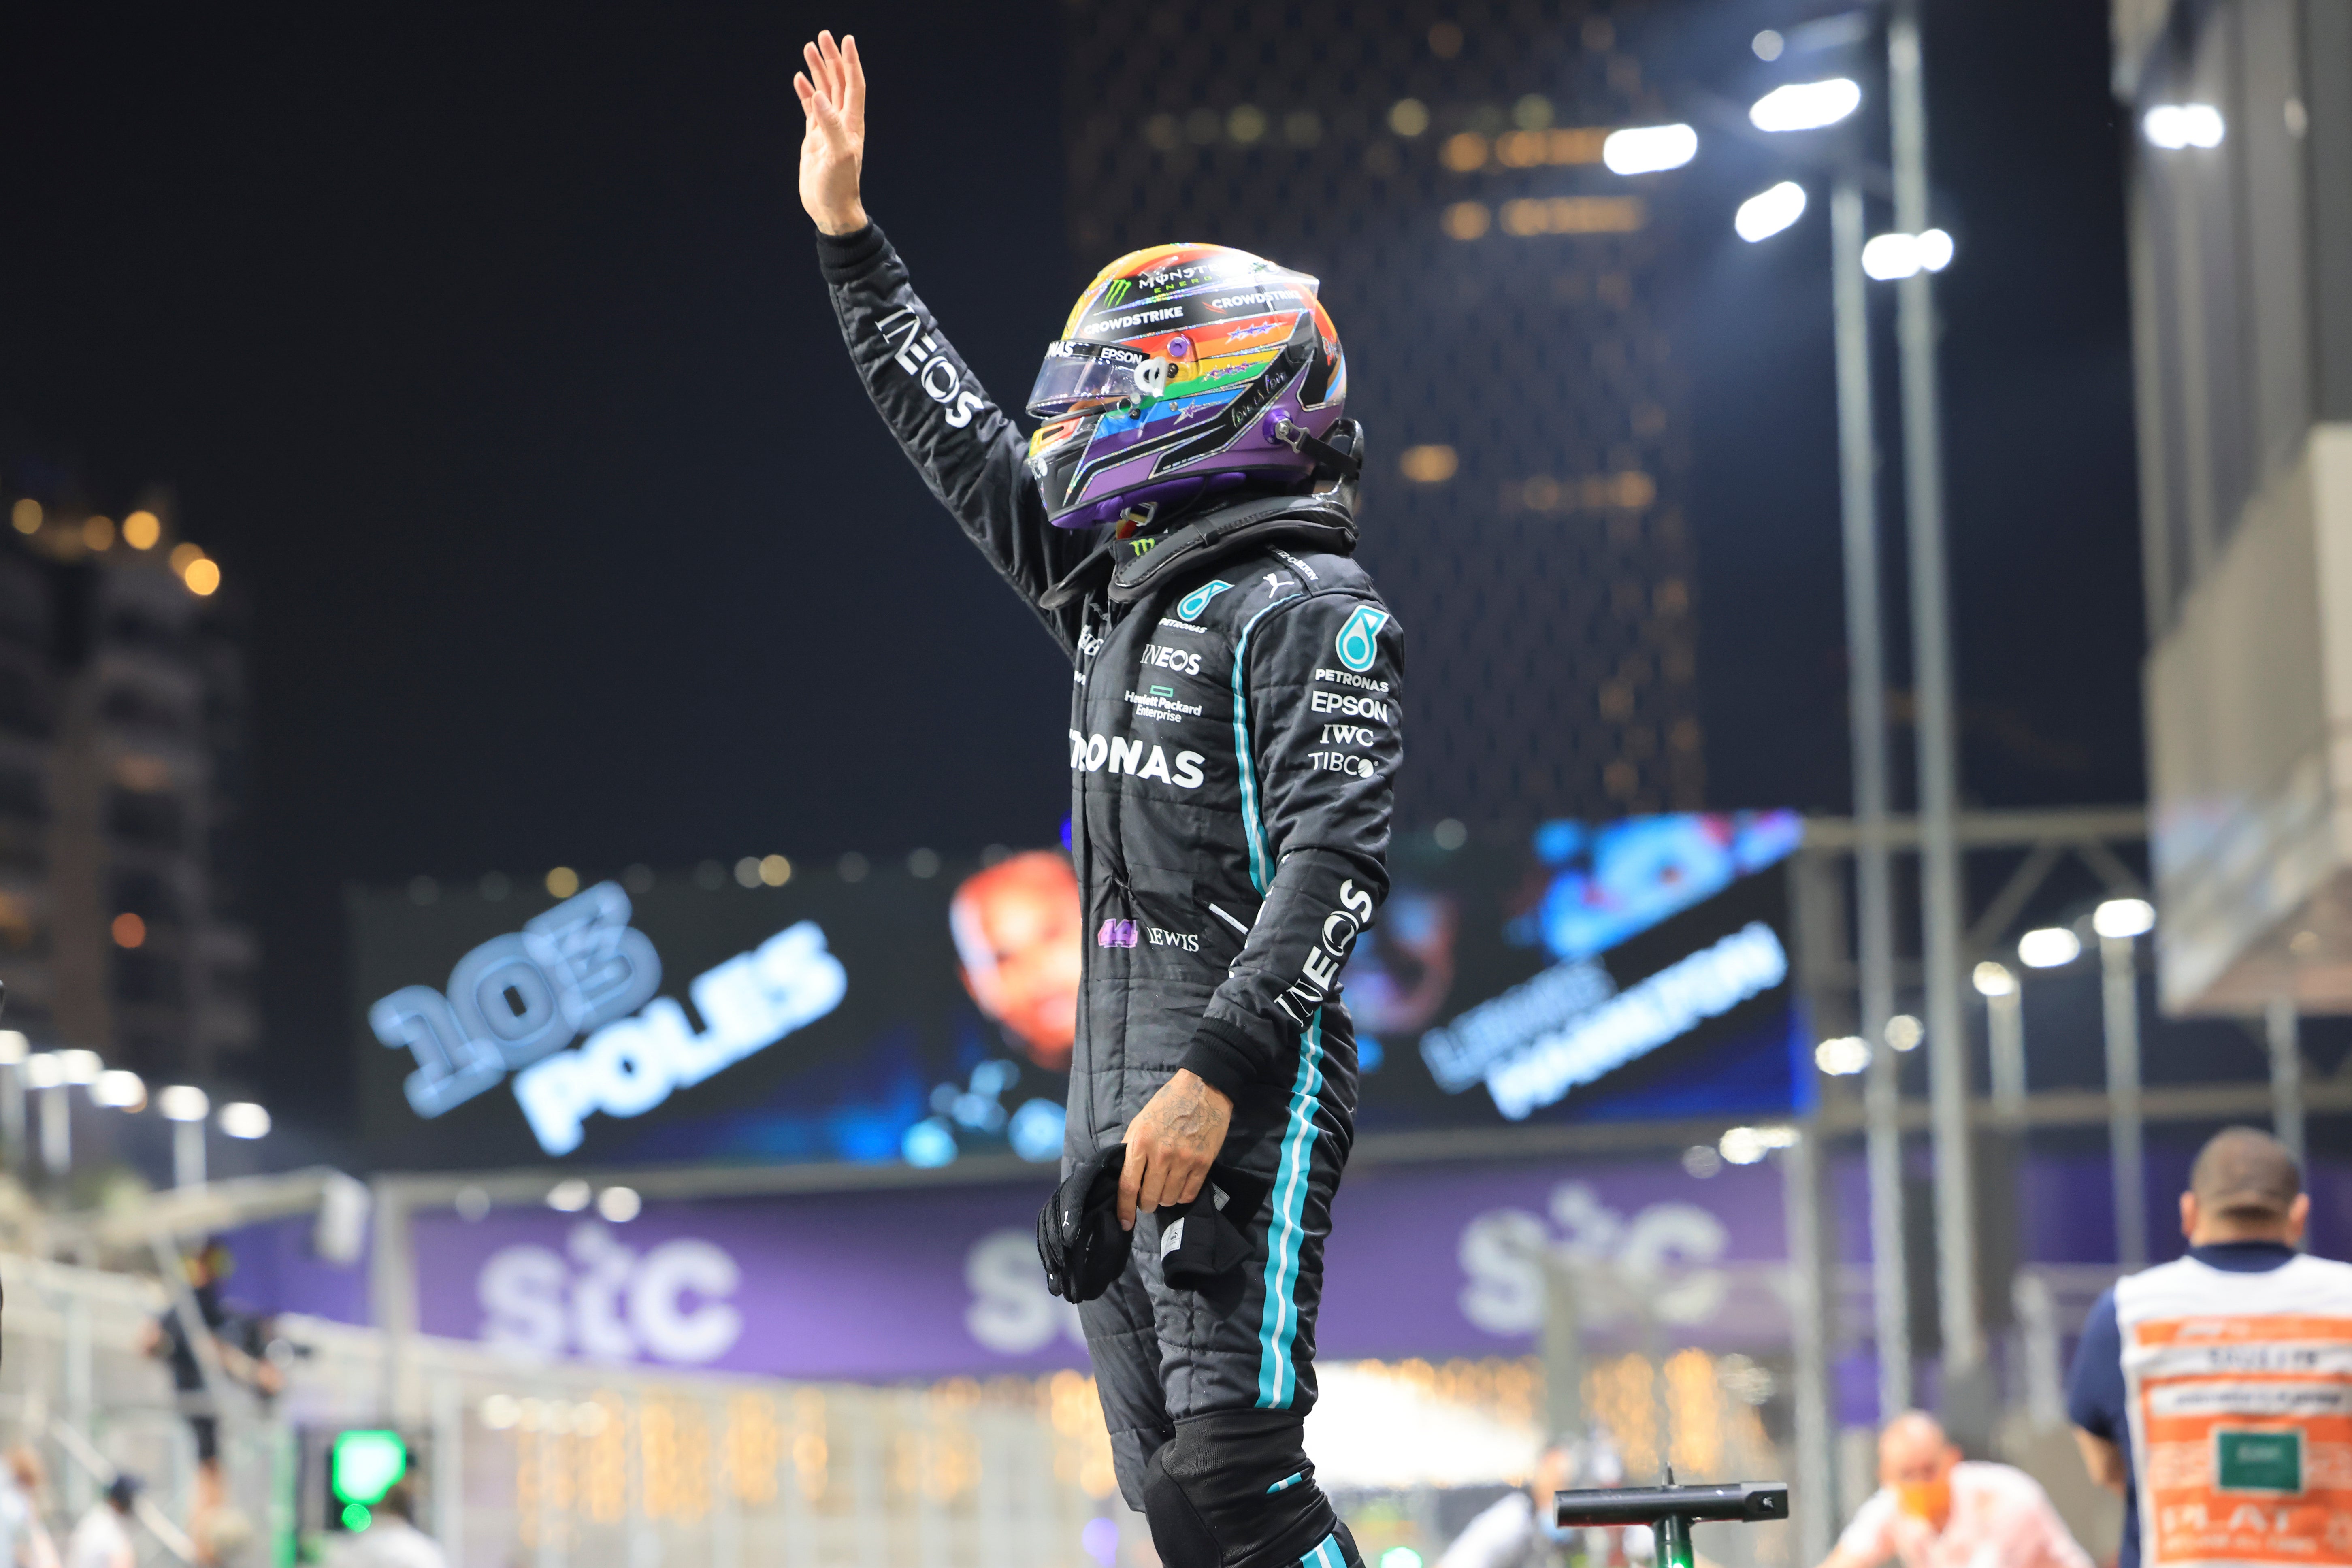 The British driver salutes the crowd at the Jeddah Corniche Circuit